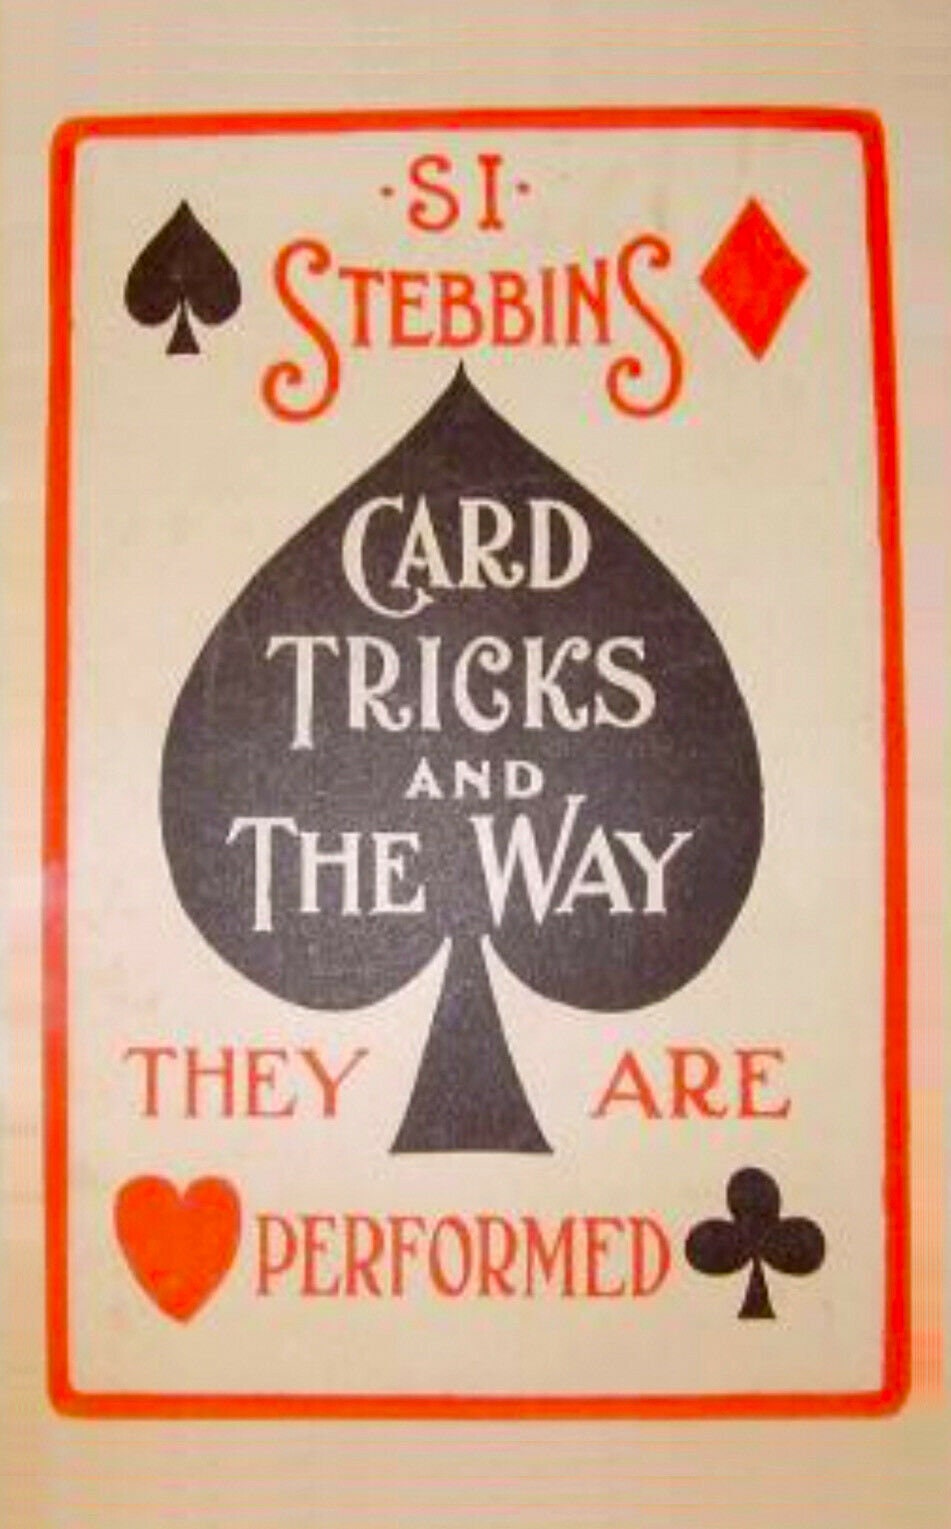 CARD TRICKS and Way They Are Performed Si Stebbins / Card - Etsy